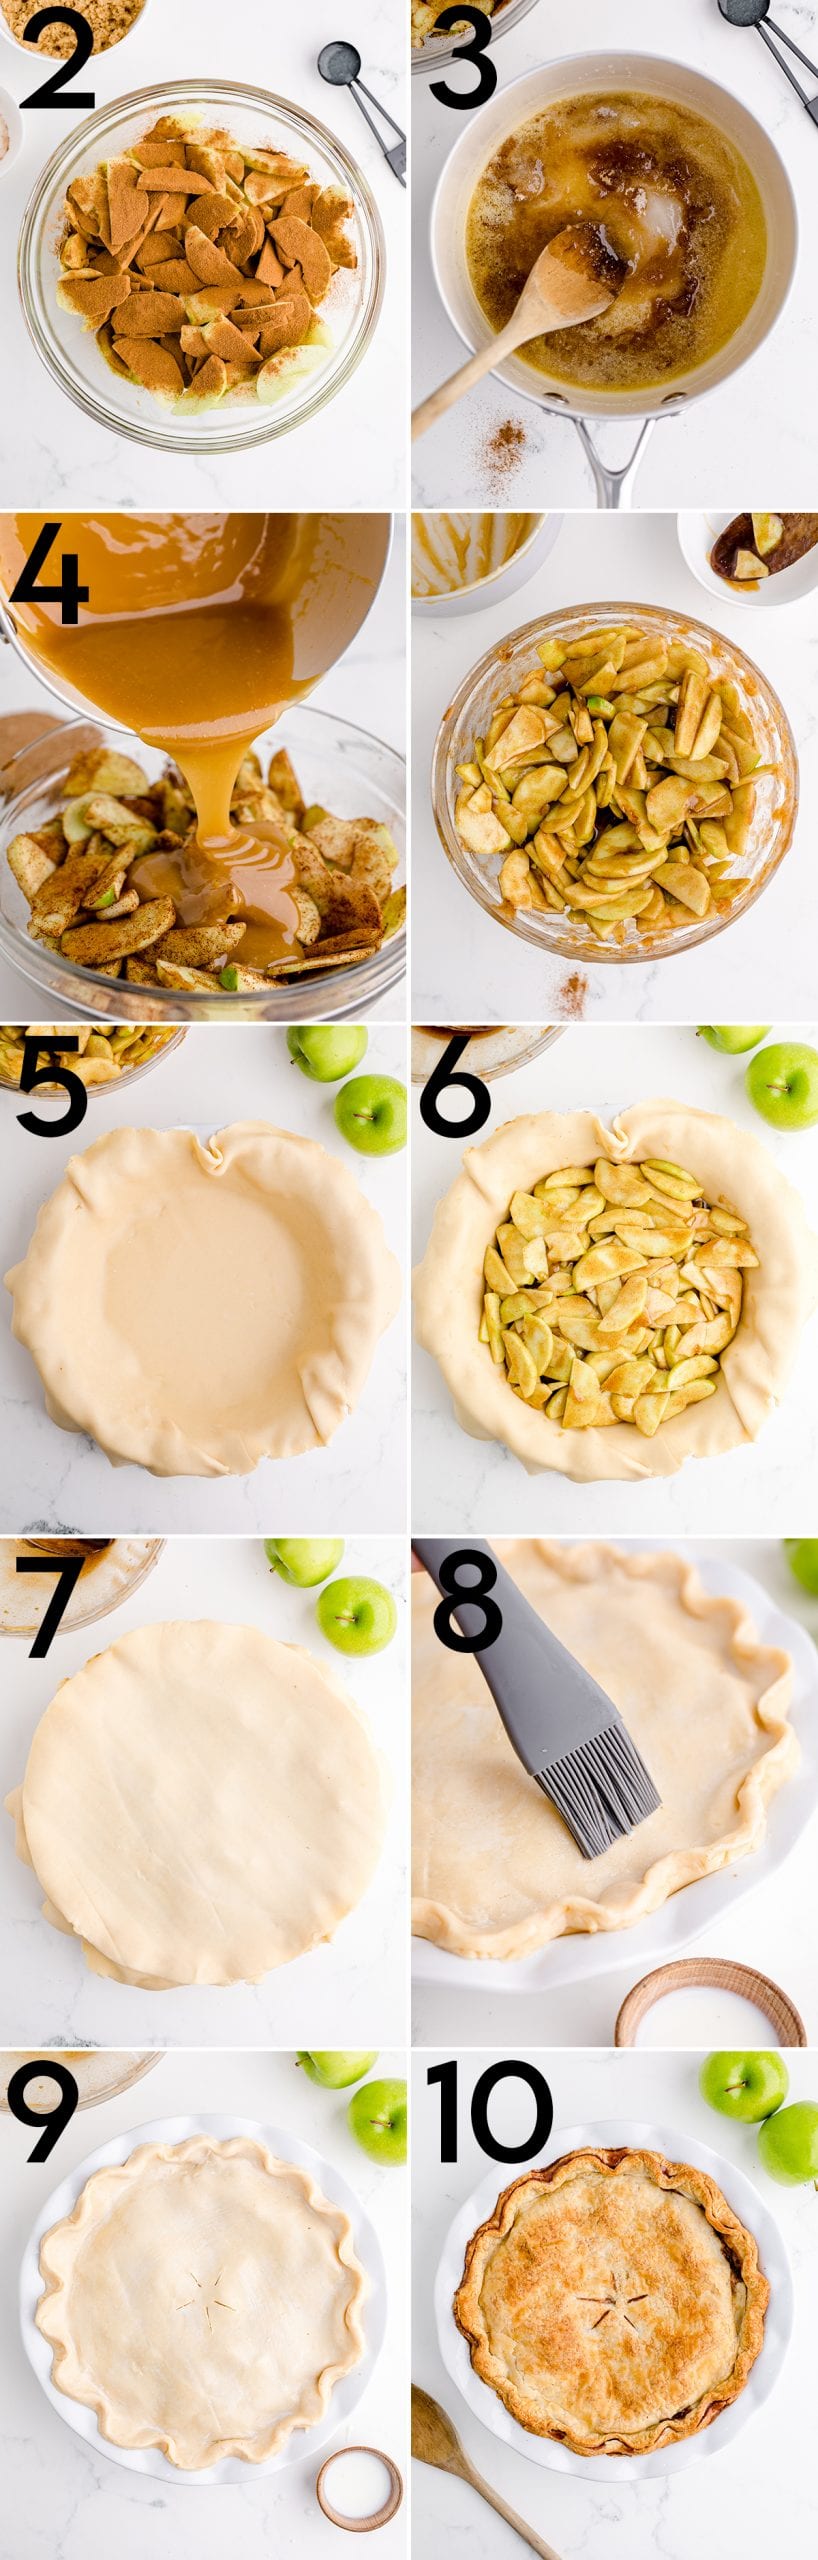  A collage of 10 step by step photos showing the steps of how to make an apple pie.